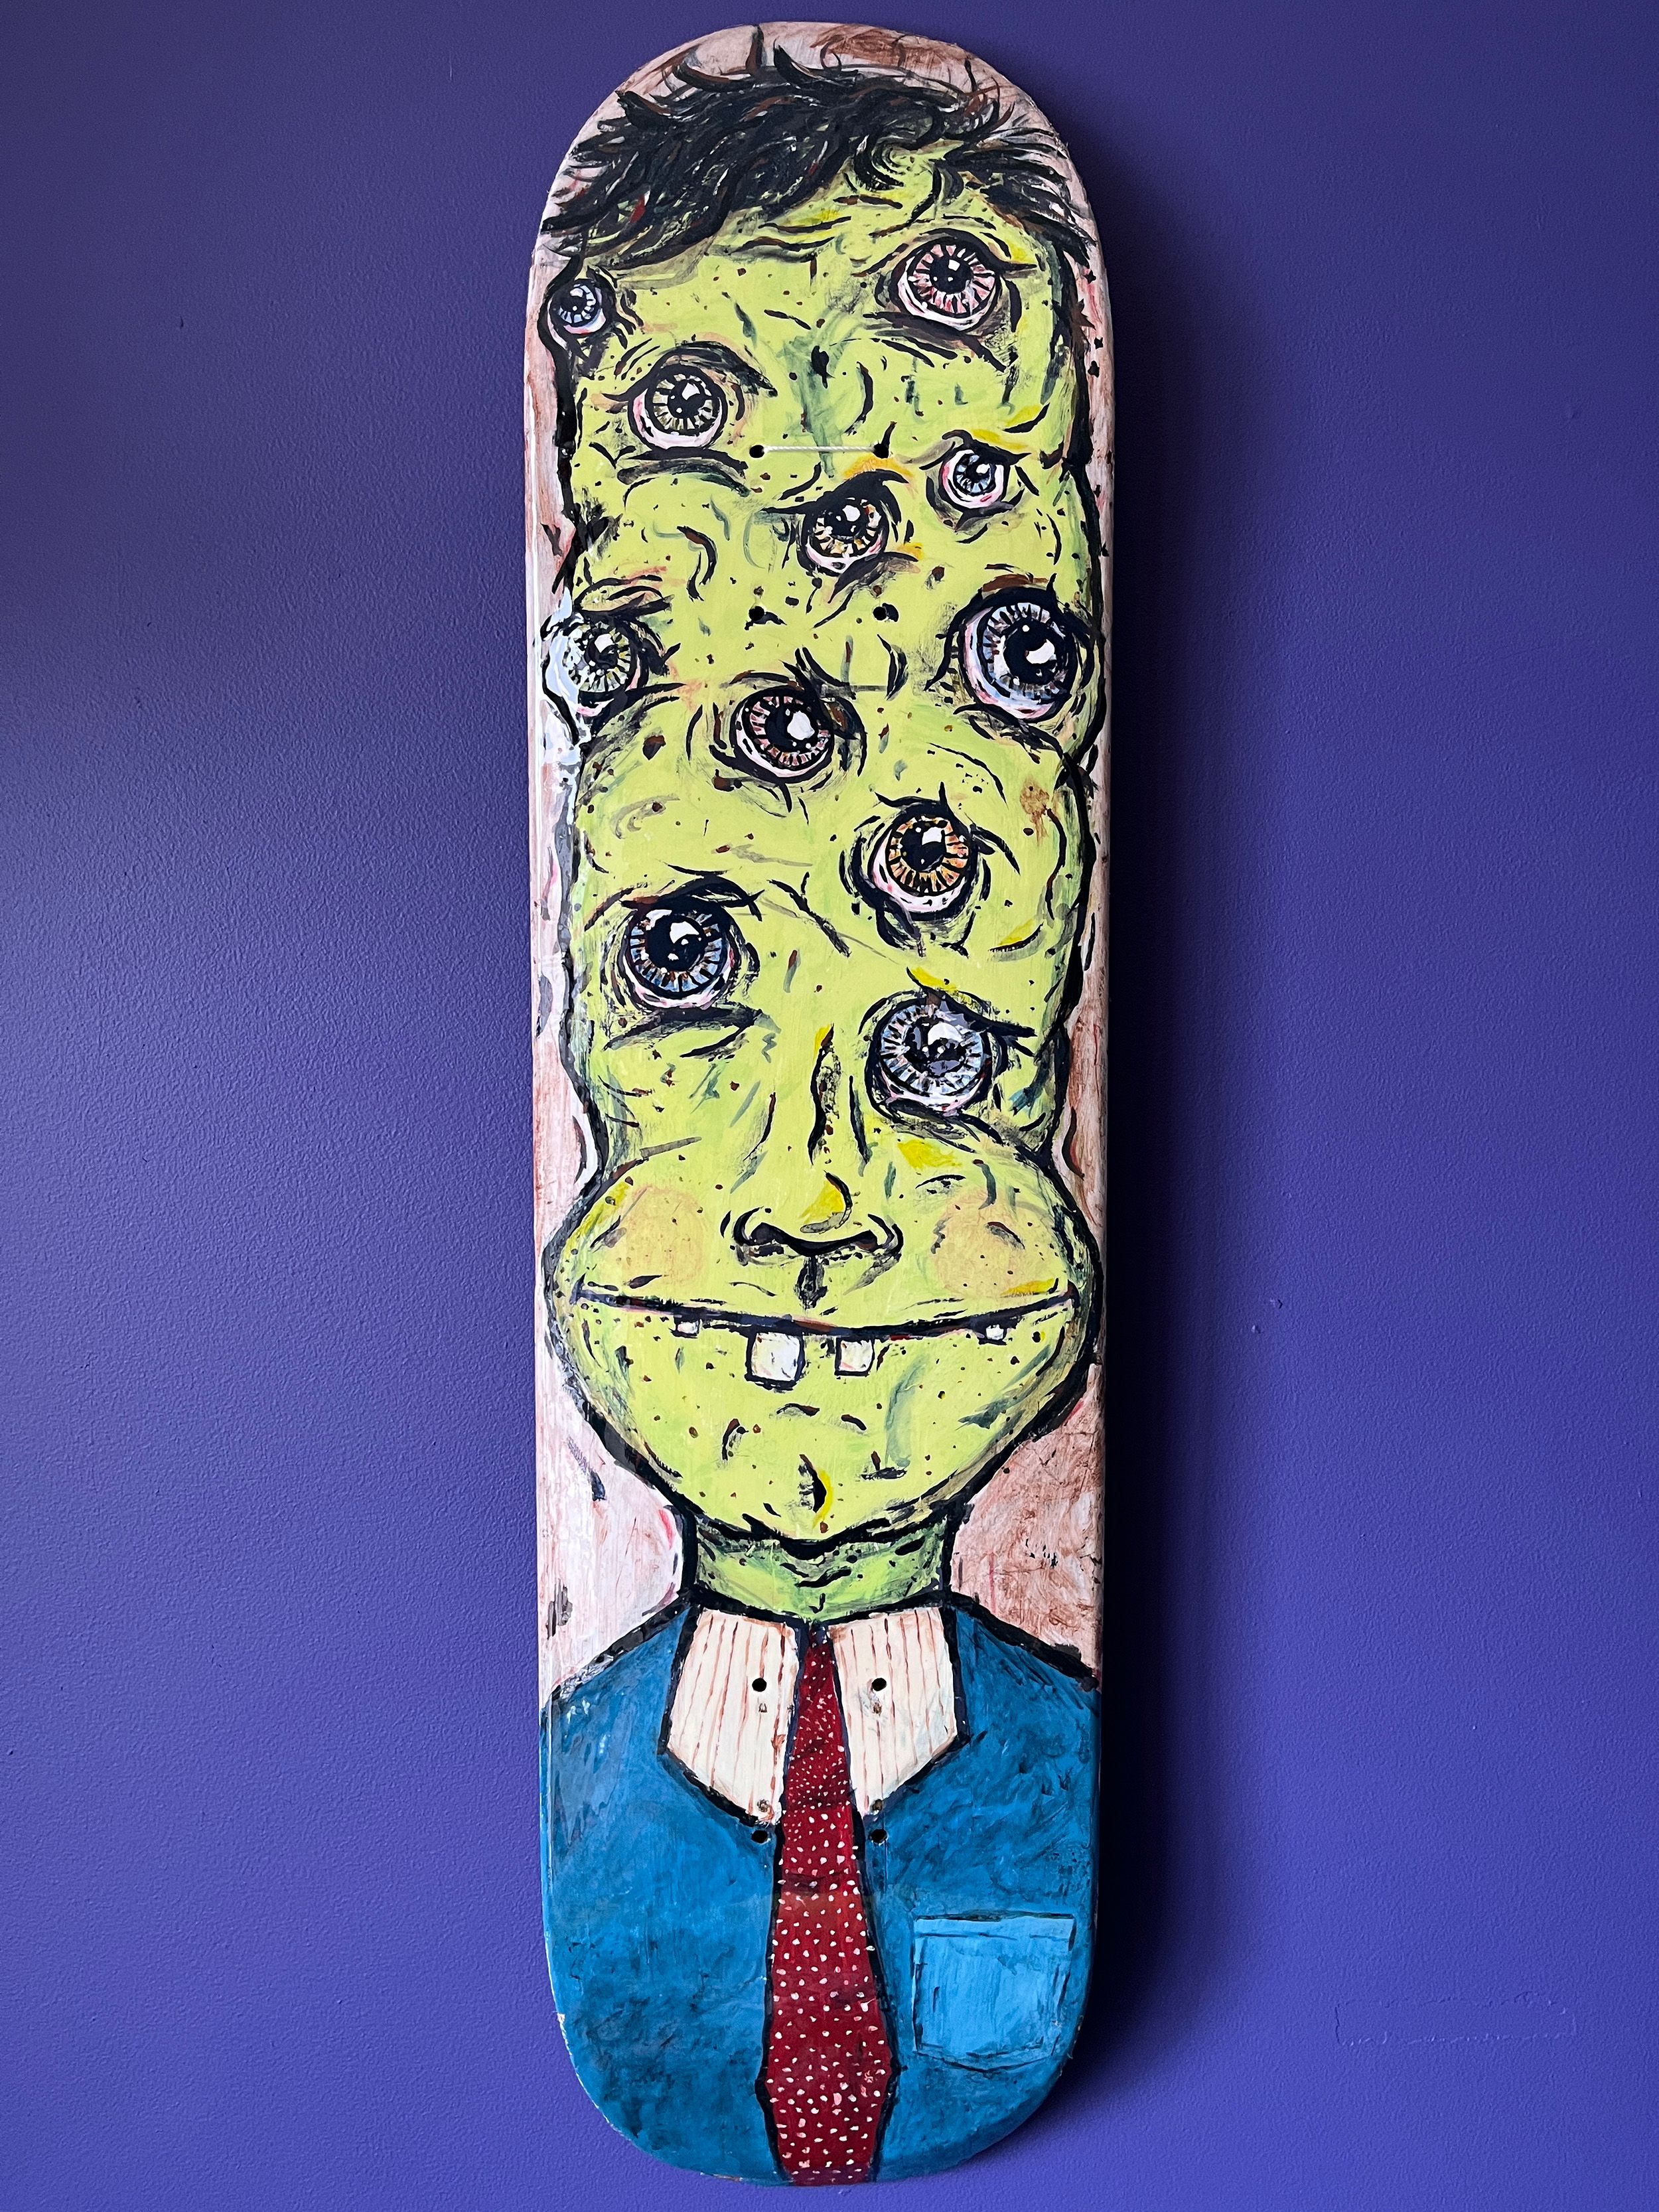 A painting of a human-looking, green-skinned being with 11 eyes, buck teeth. The painting is on a skateboard deck, so the character's head is elongated. He's wearing a blue dress shirt with a white collar and a red tie with white dots.